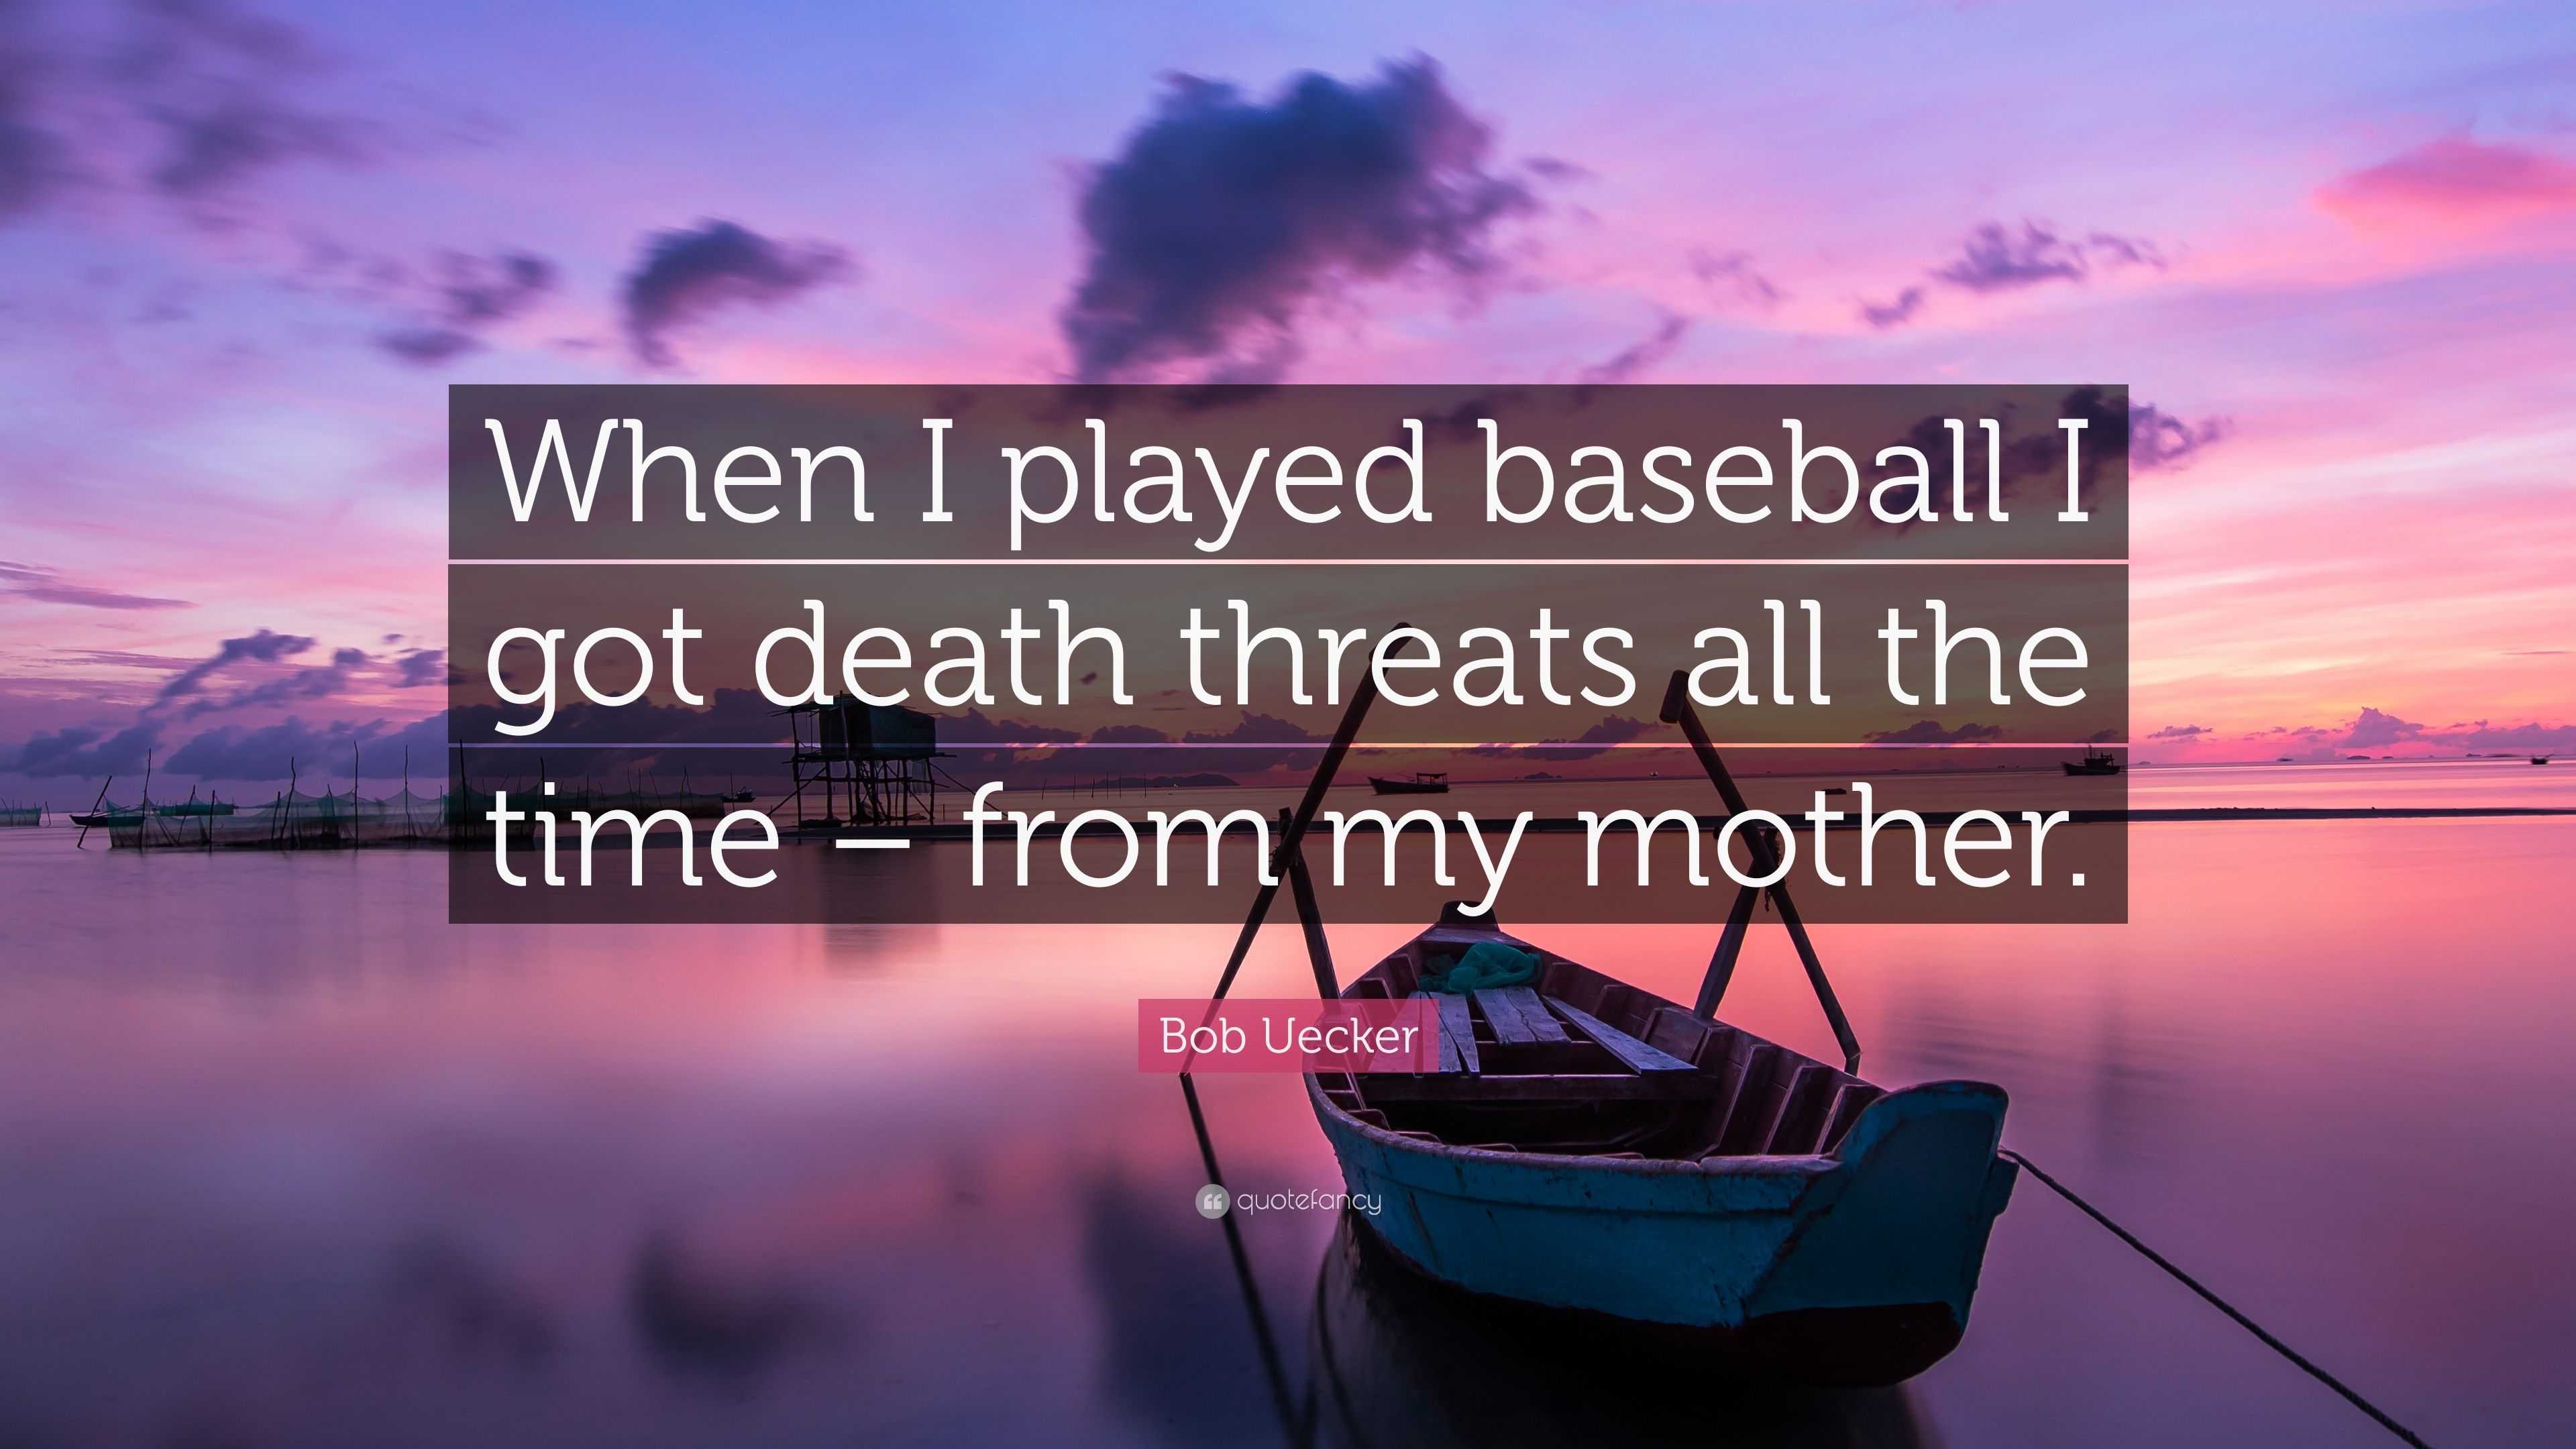 Bob Uecker Quote: “When I played baseball I got death threats all the time  – from my